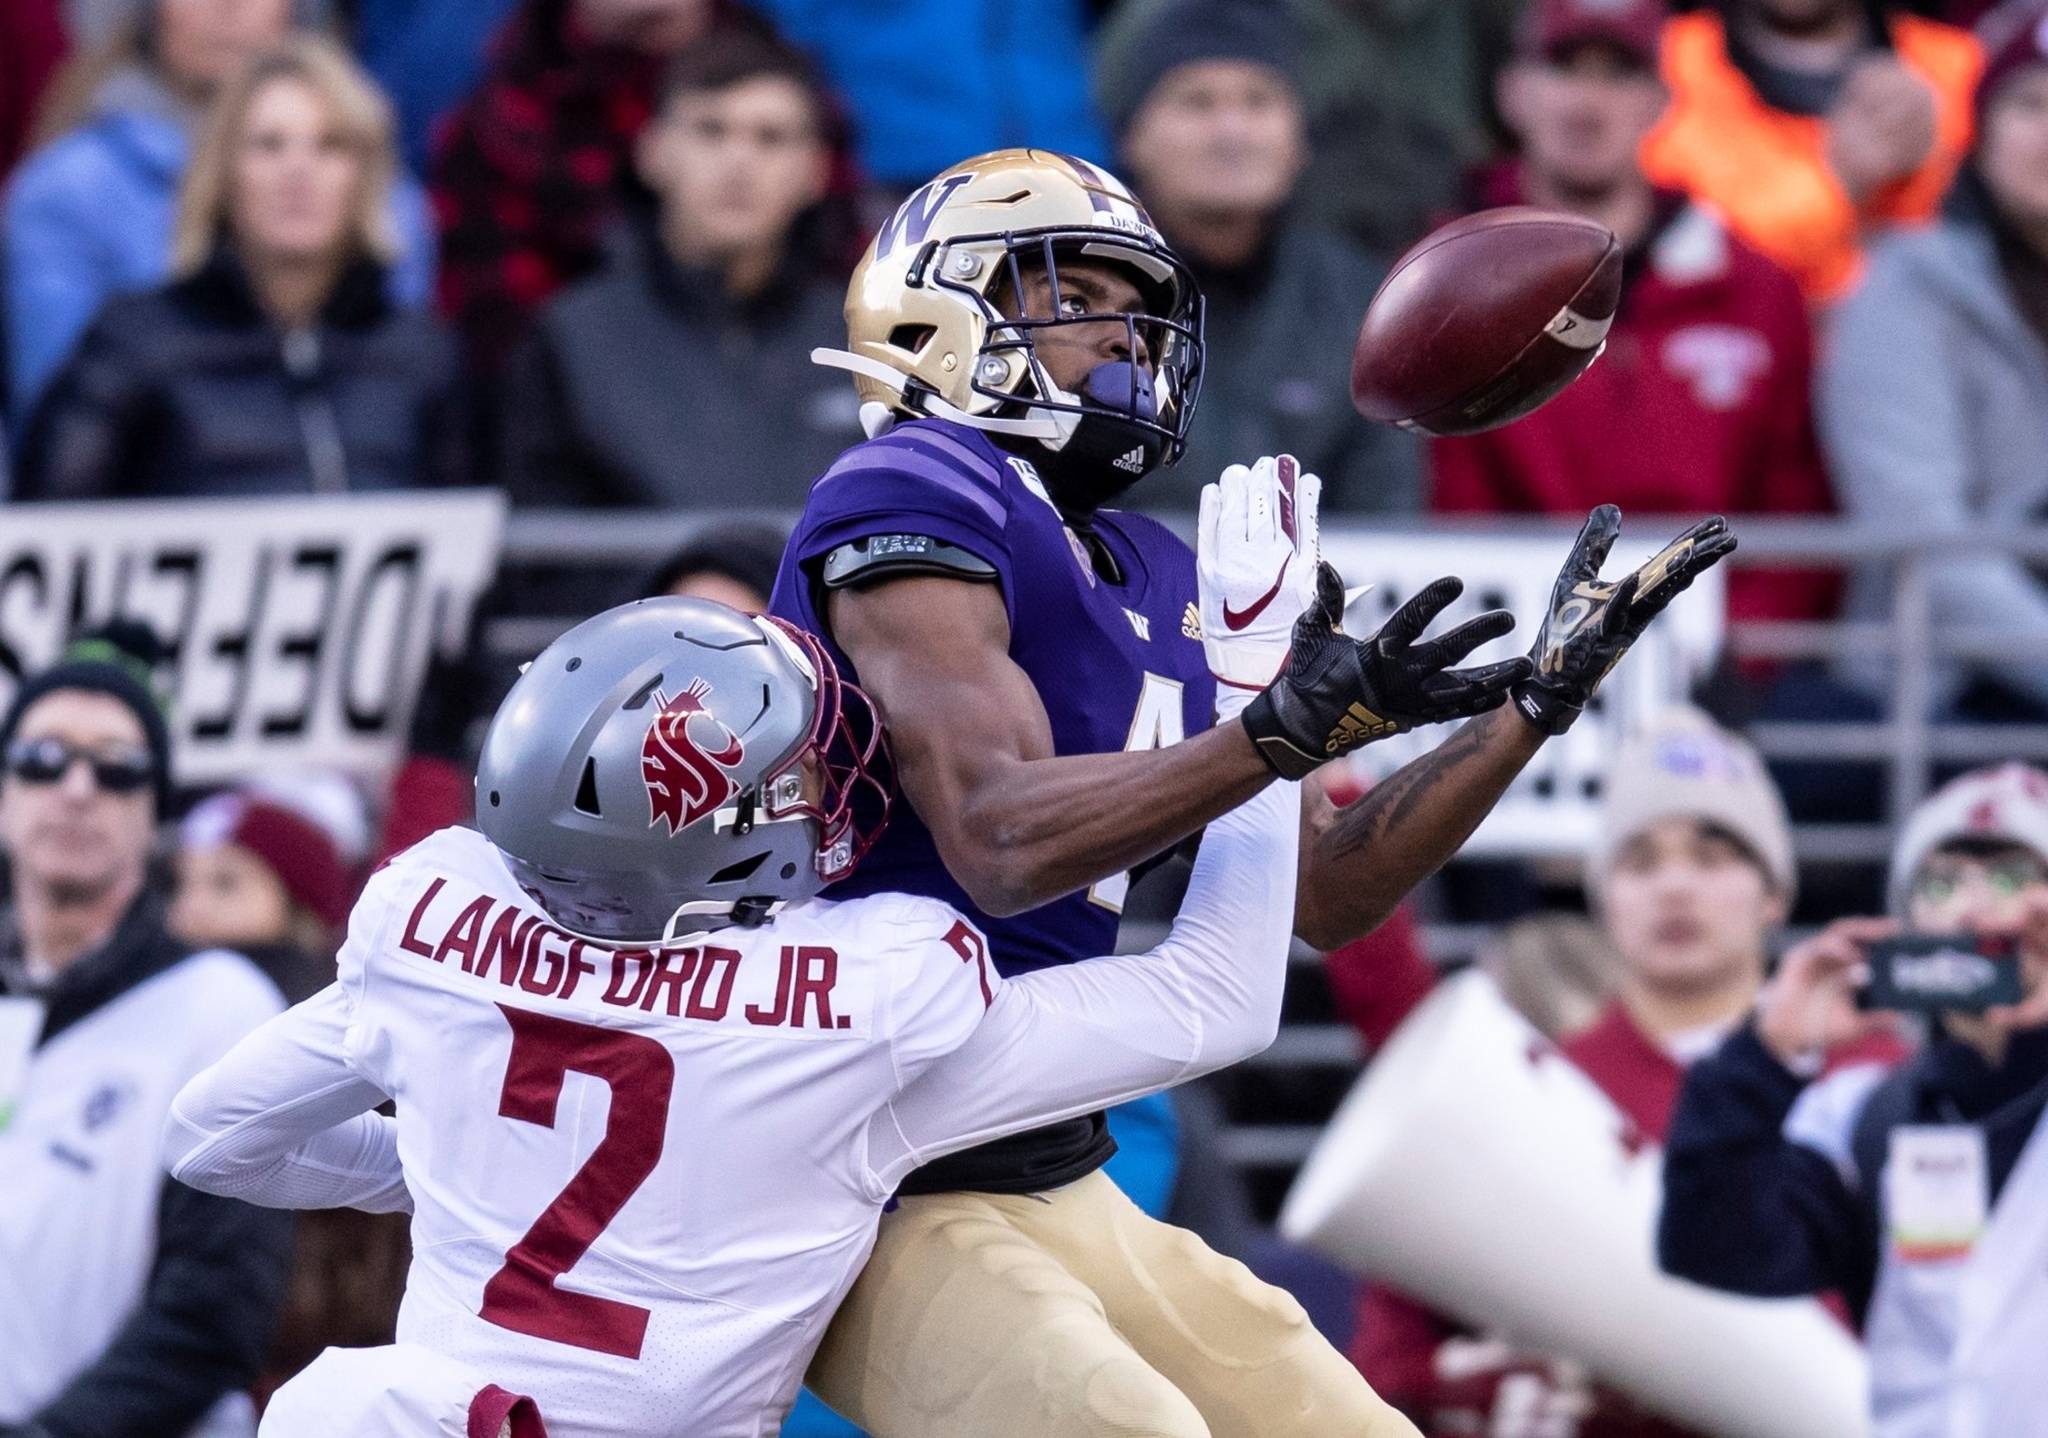 APPLE CUP: Huskies win their seventh straight over Cougs